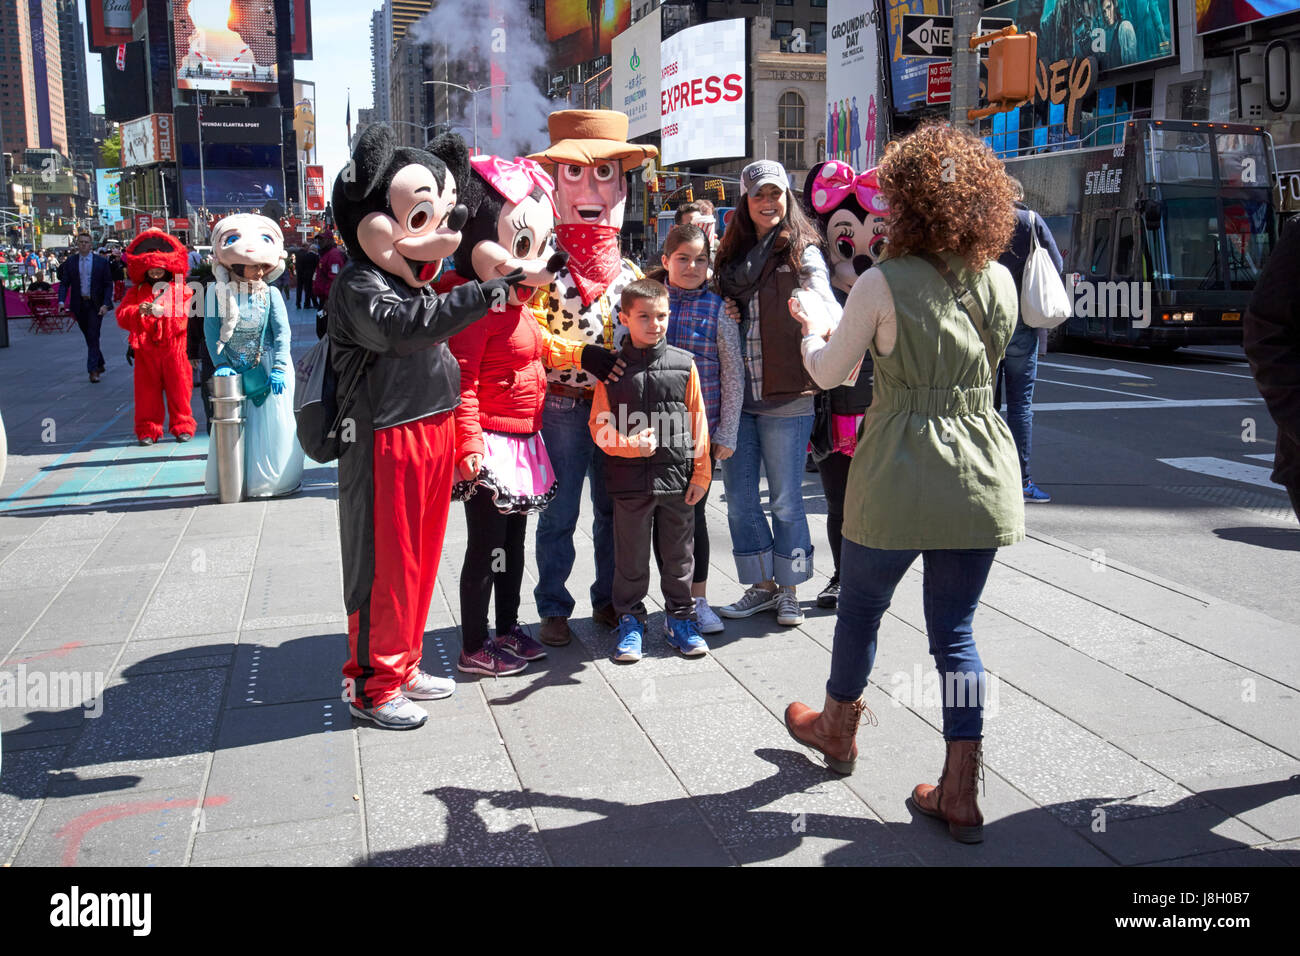 children and tourists pose for photos with people dressed as animated characters in times square New York City USA Stock Photo